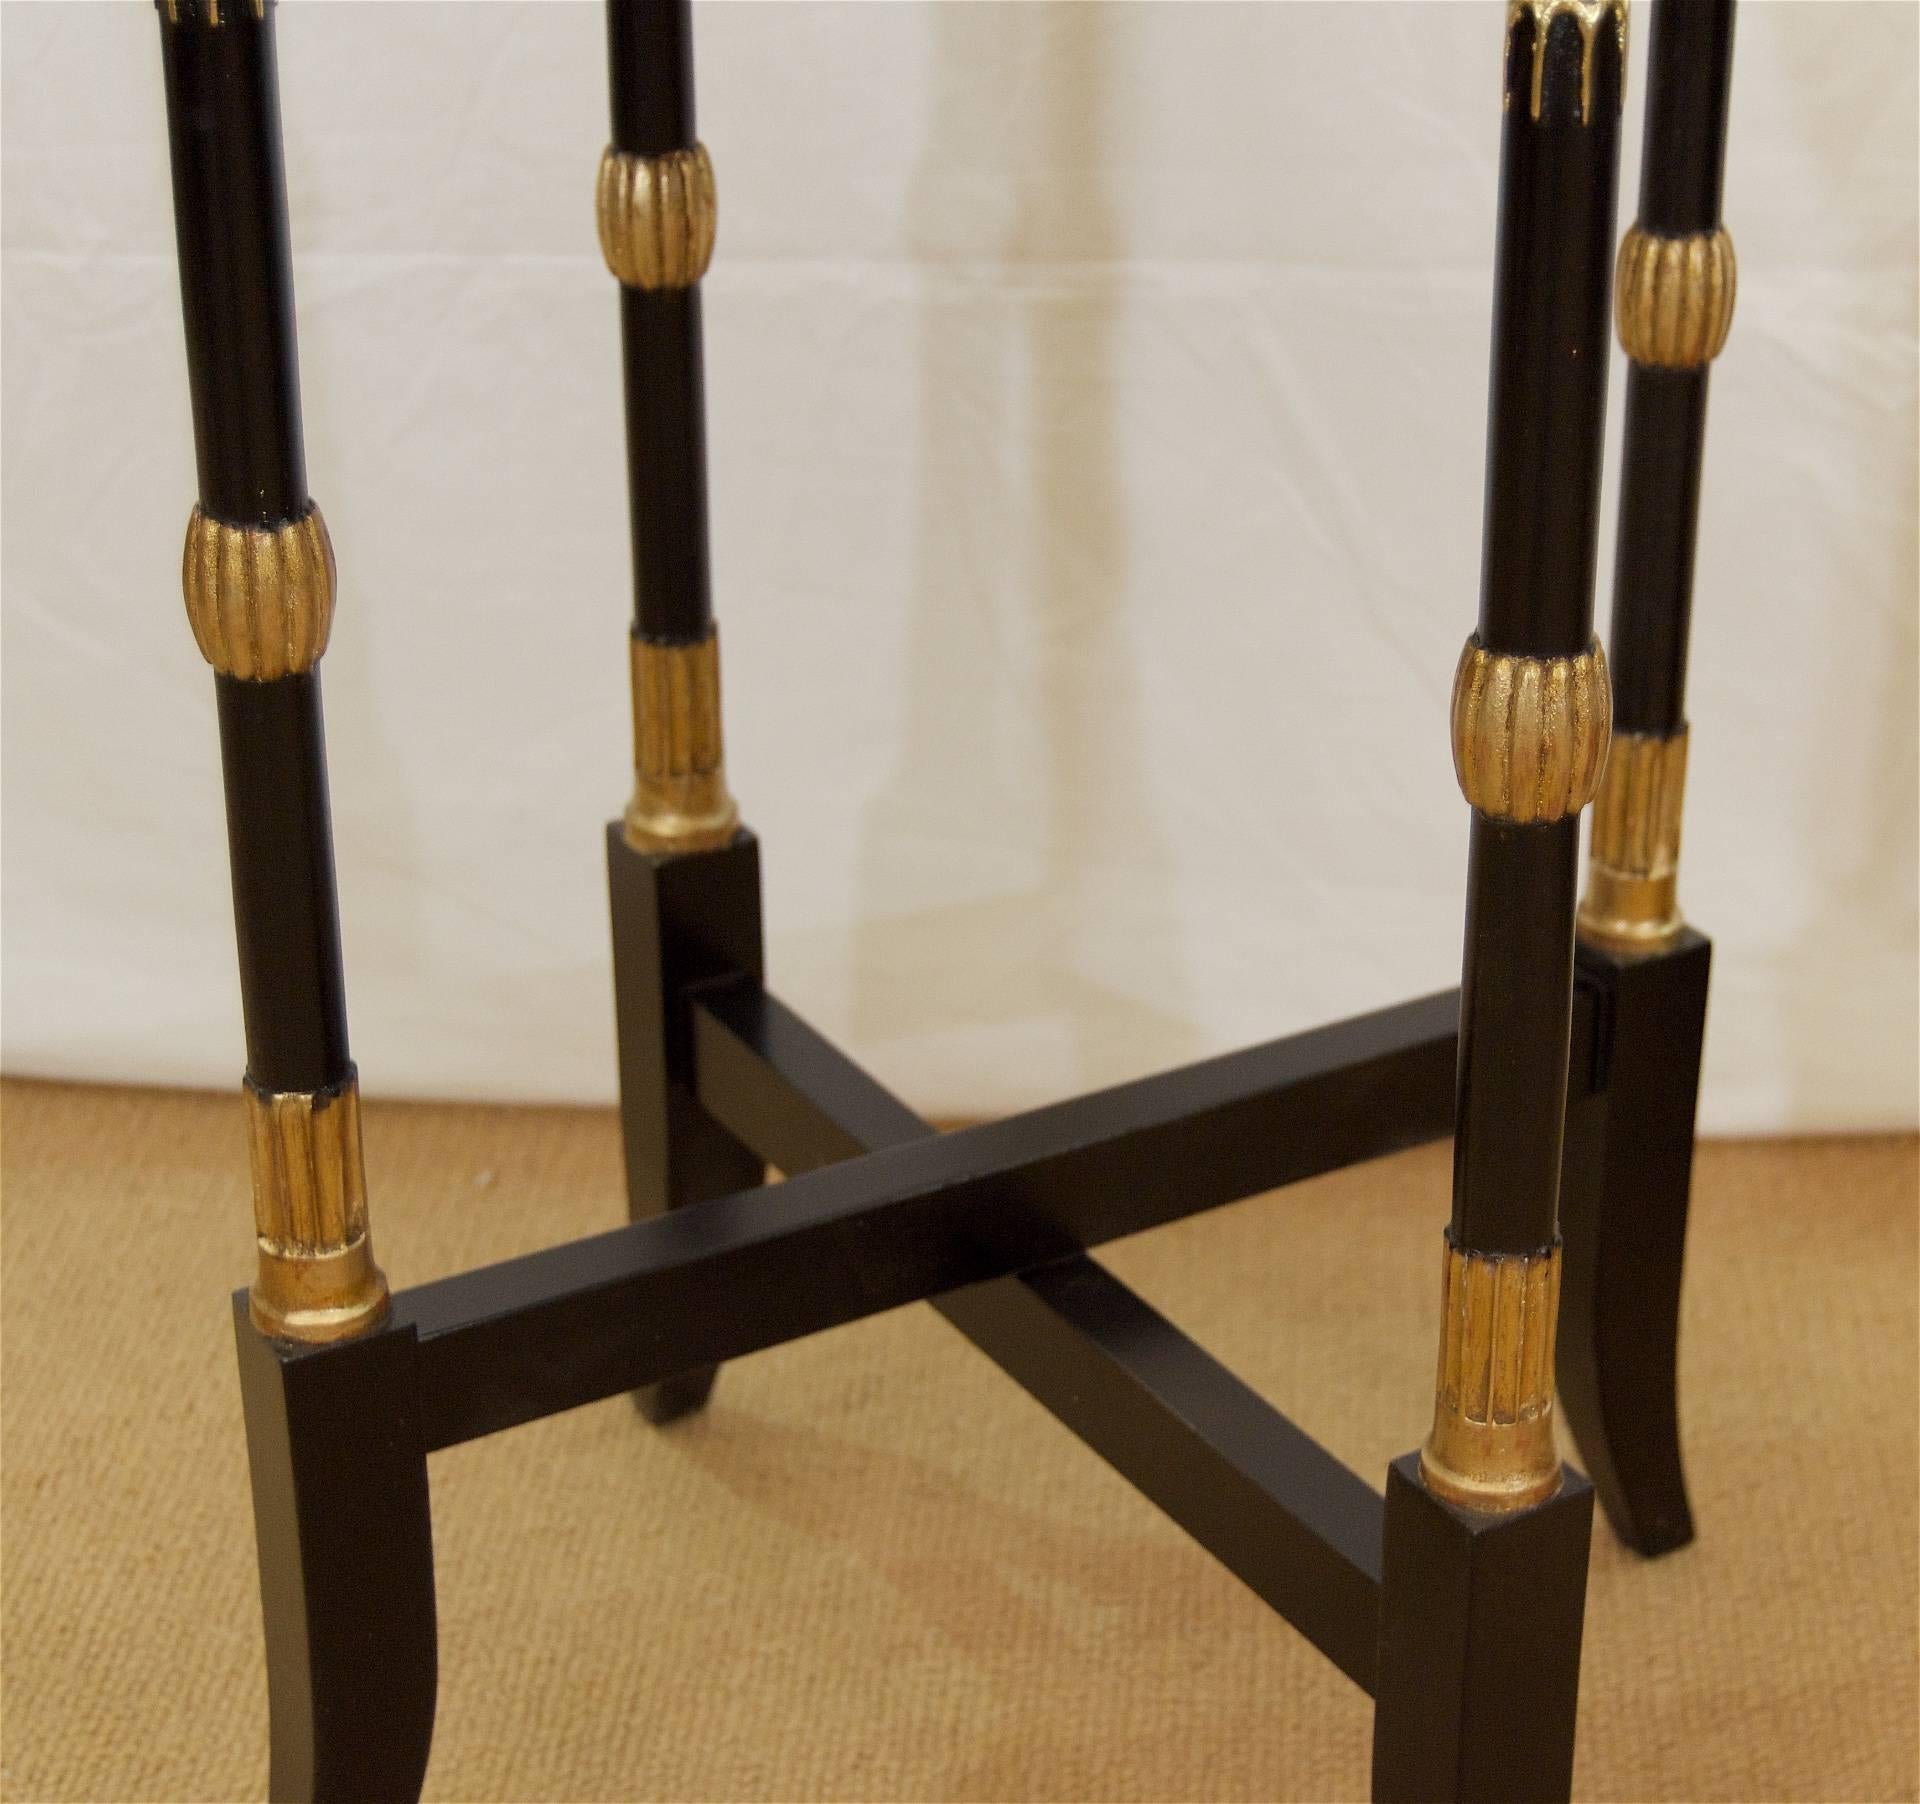 Black Lacquer Regency-Style Folding Occasional Tables from the Fontainebleau In Excellent Condition For Sale In Stamford, CT